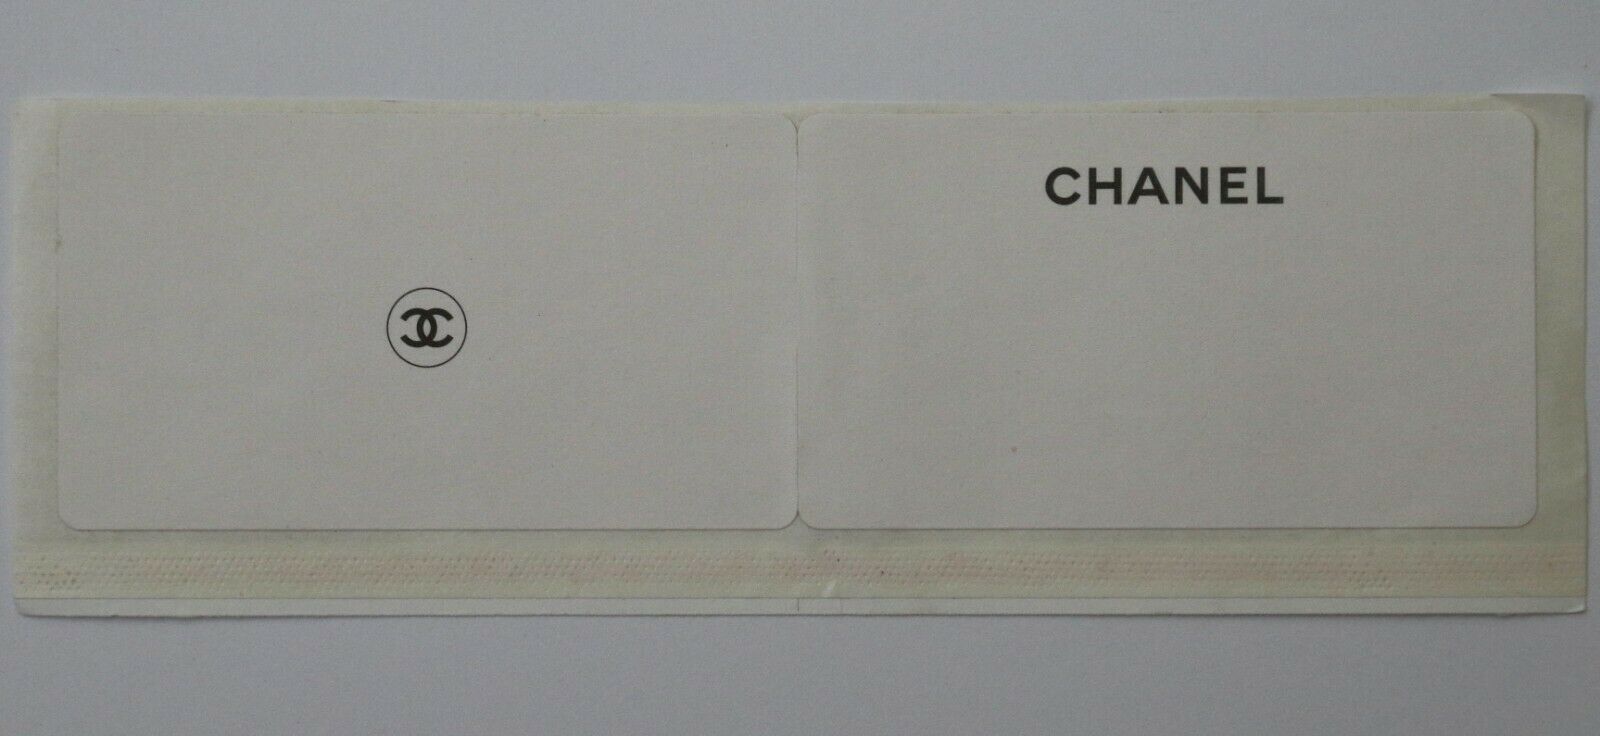 Authentic CHANEL White Double Sticker Gift Wrap Note - $7.95